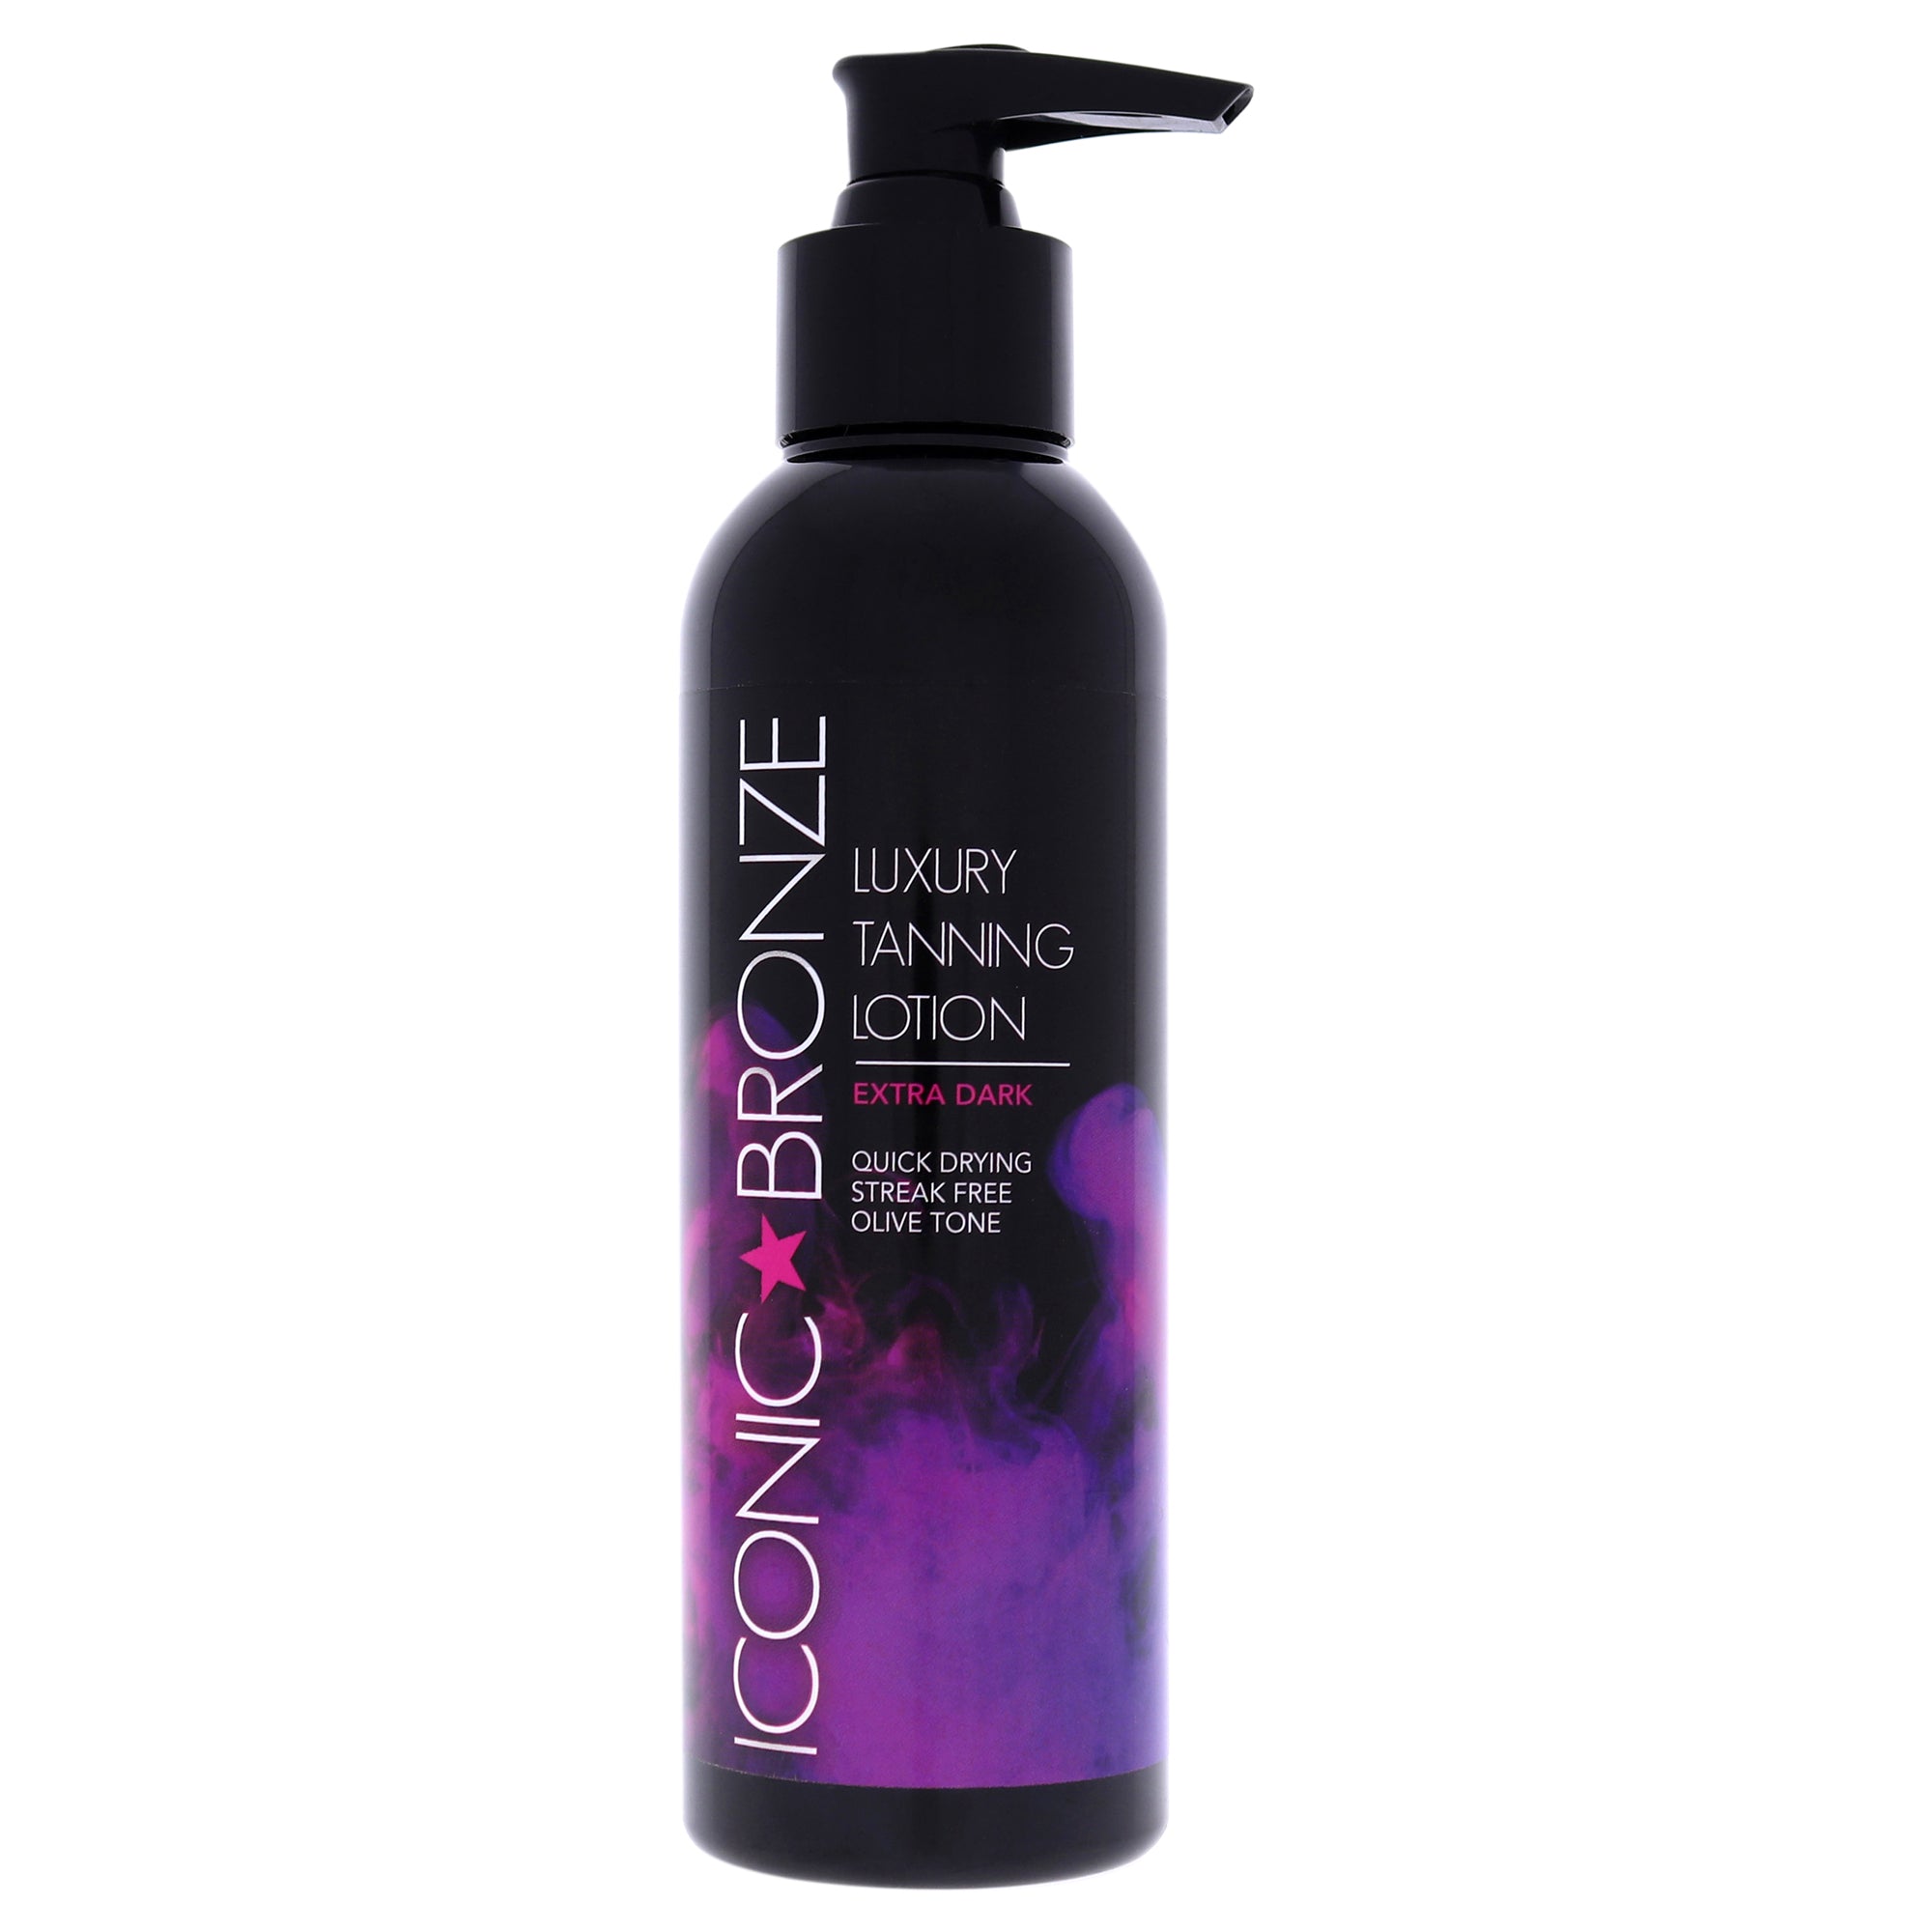 Luxury Tanning Lotion - Extra Dark by Iconic Bronze for Women - 6.76 oz Lotion